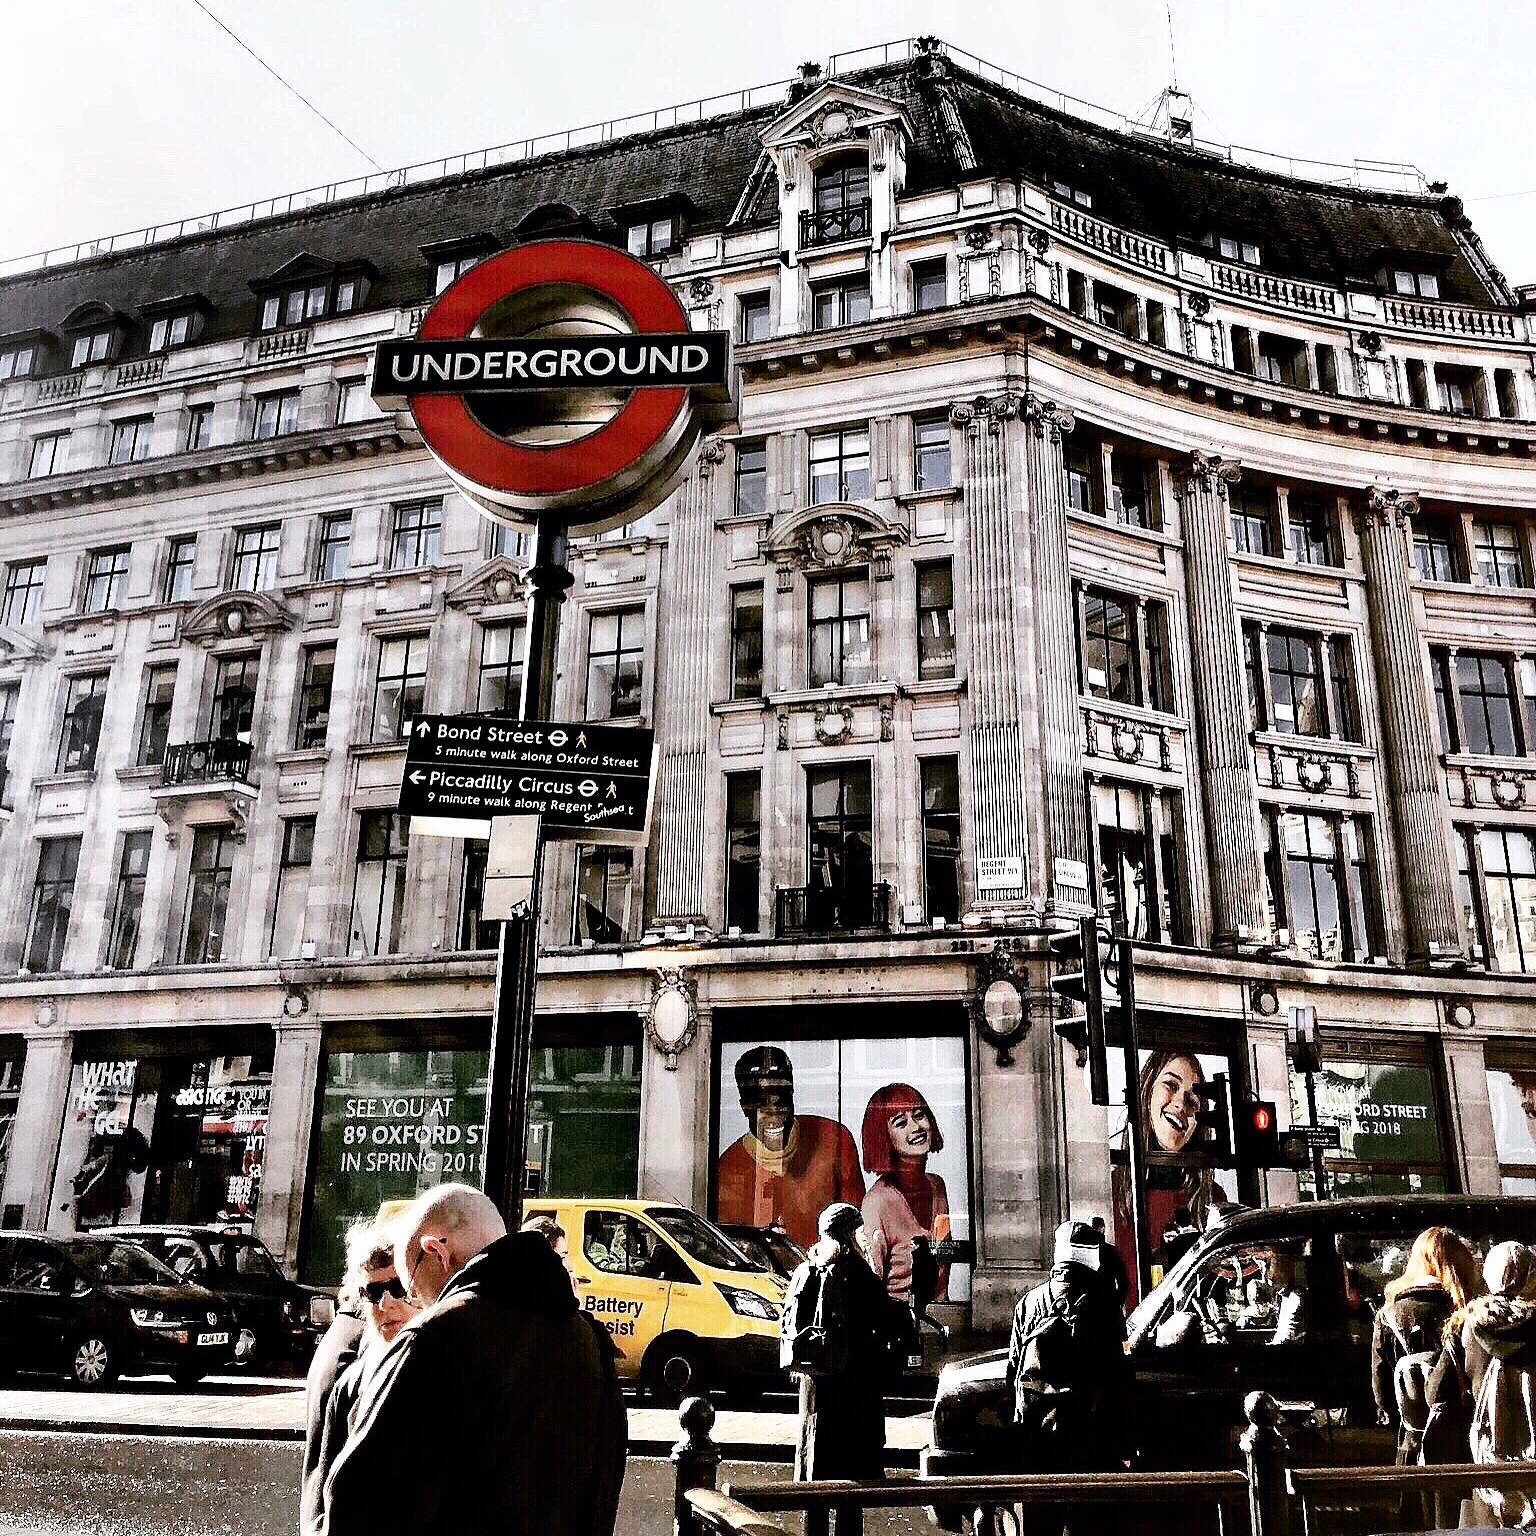 CAPAStudyAbroad_London_Spring2018_From Kelly Allen - Underground Street Sign_square.png